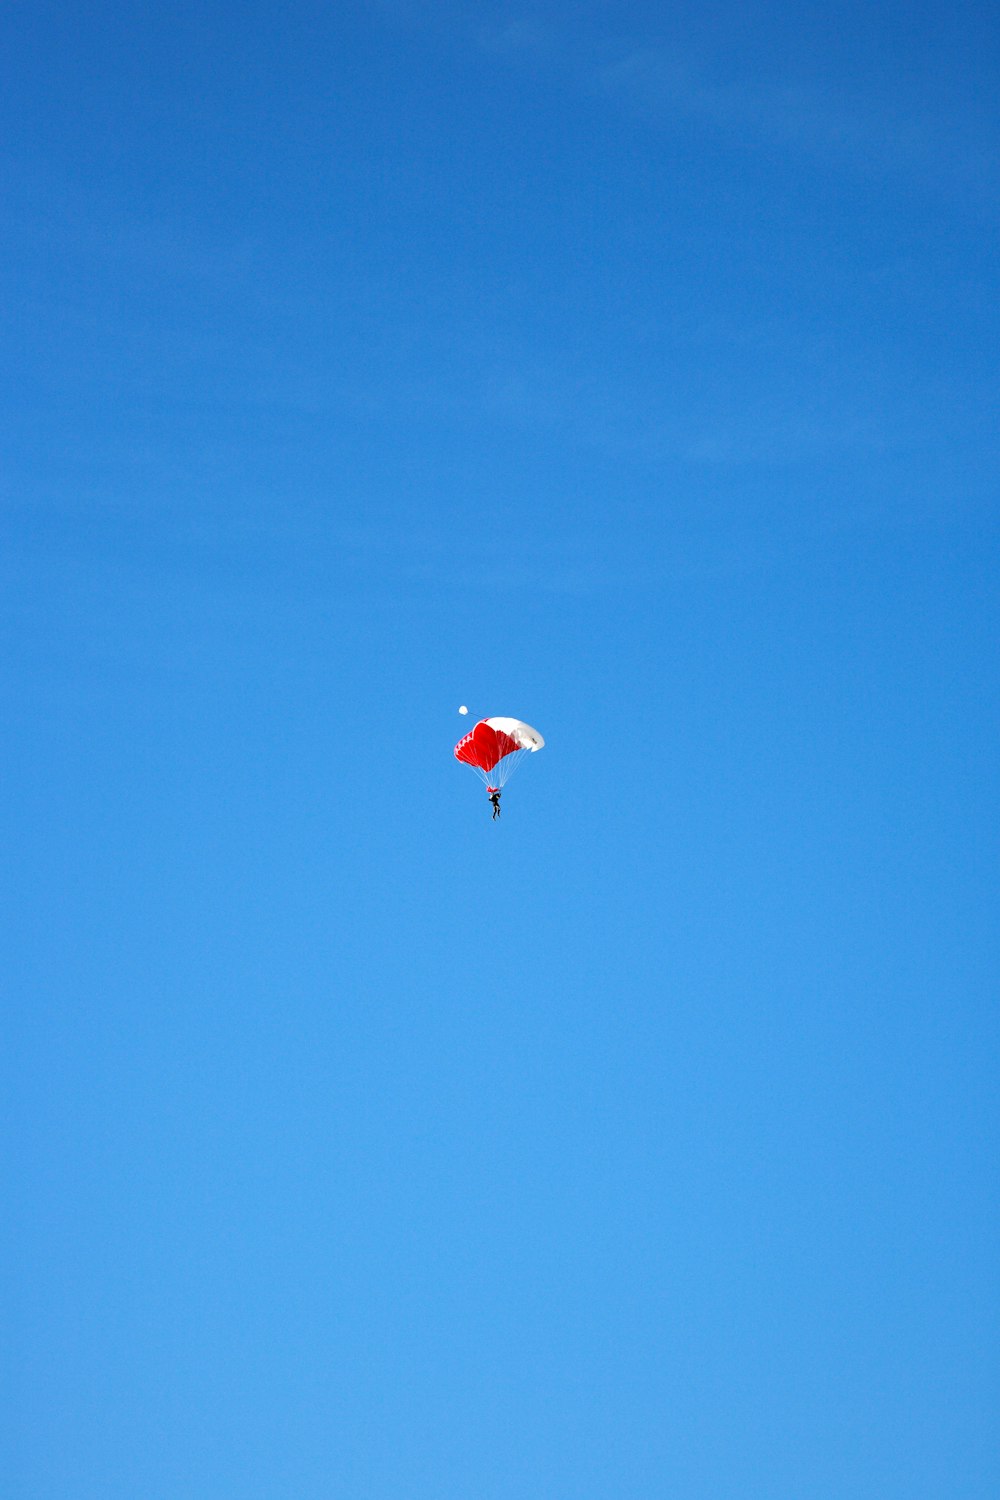 person in red parachute in mid air during daytime